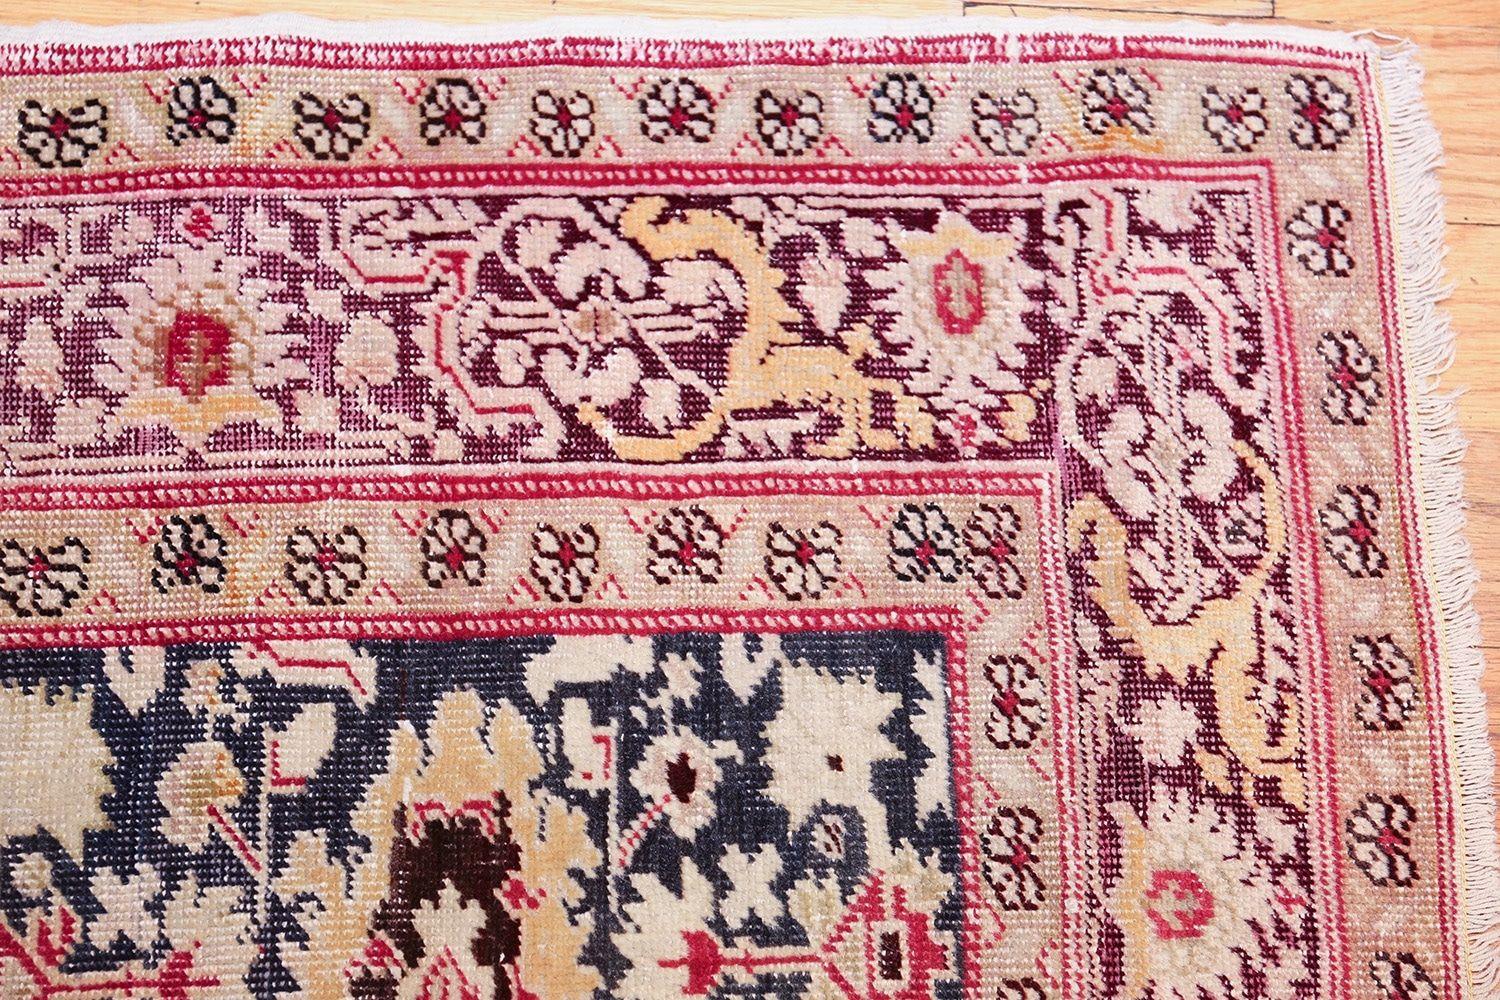 Wool Antique Turkish Sivas Rug. Size: 4 ft 3 in x 5 ft 8 in For Sale